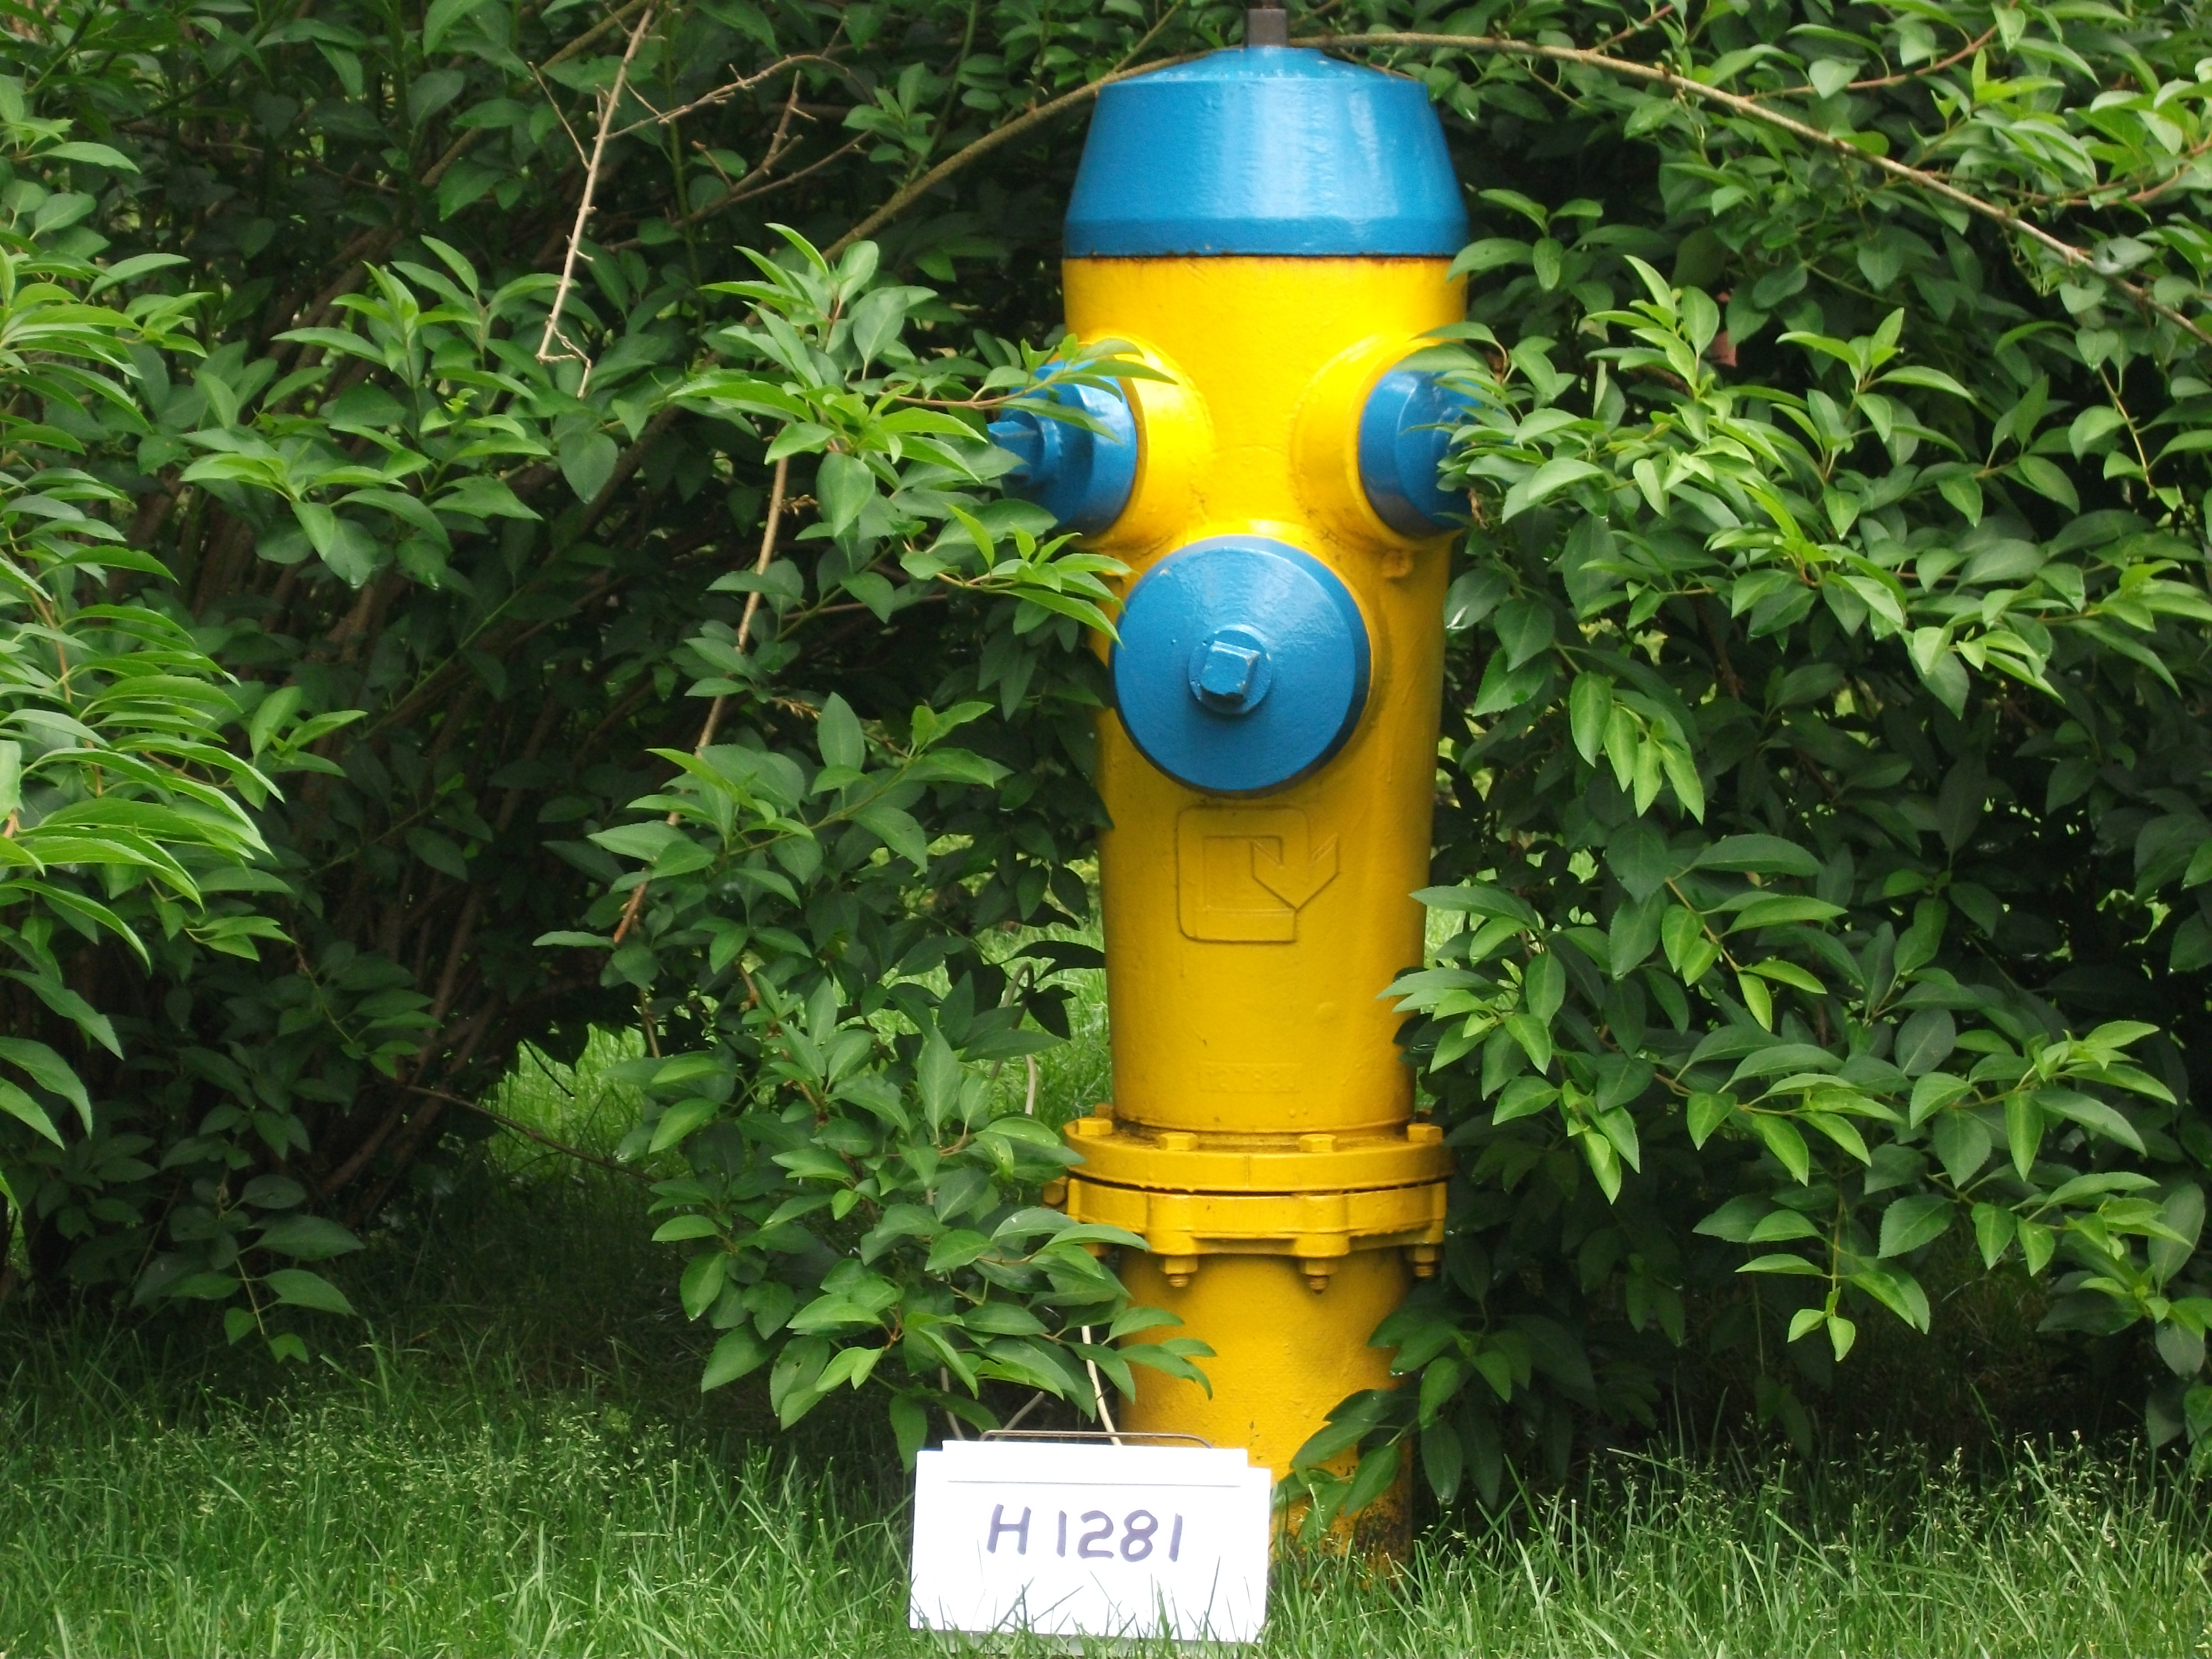 Fire hydrant in green bushes